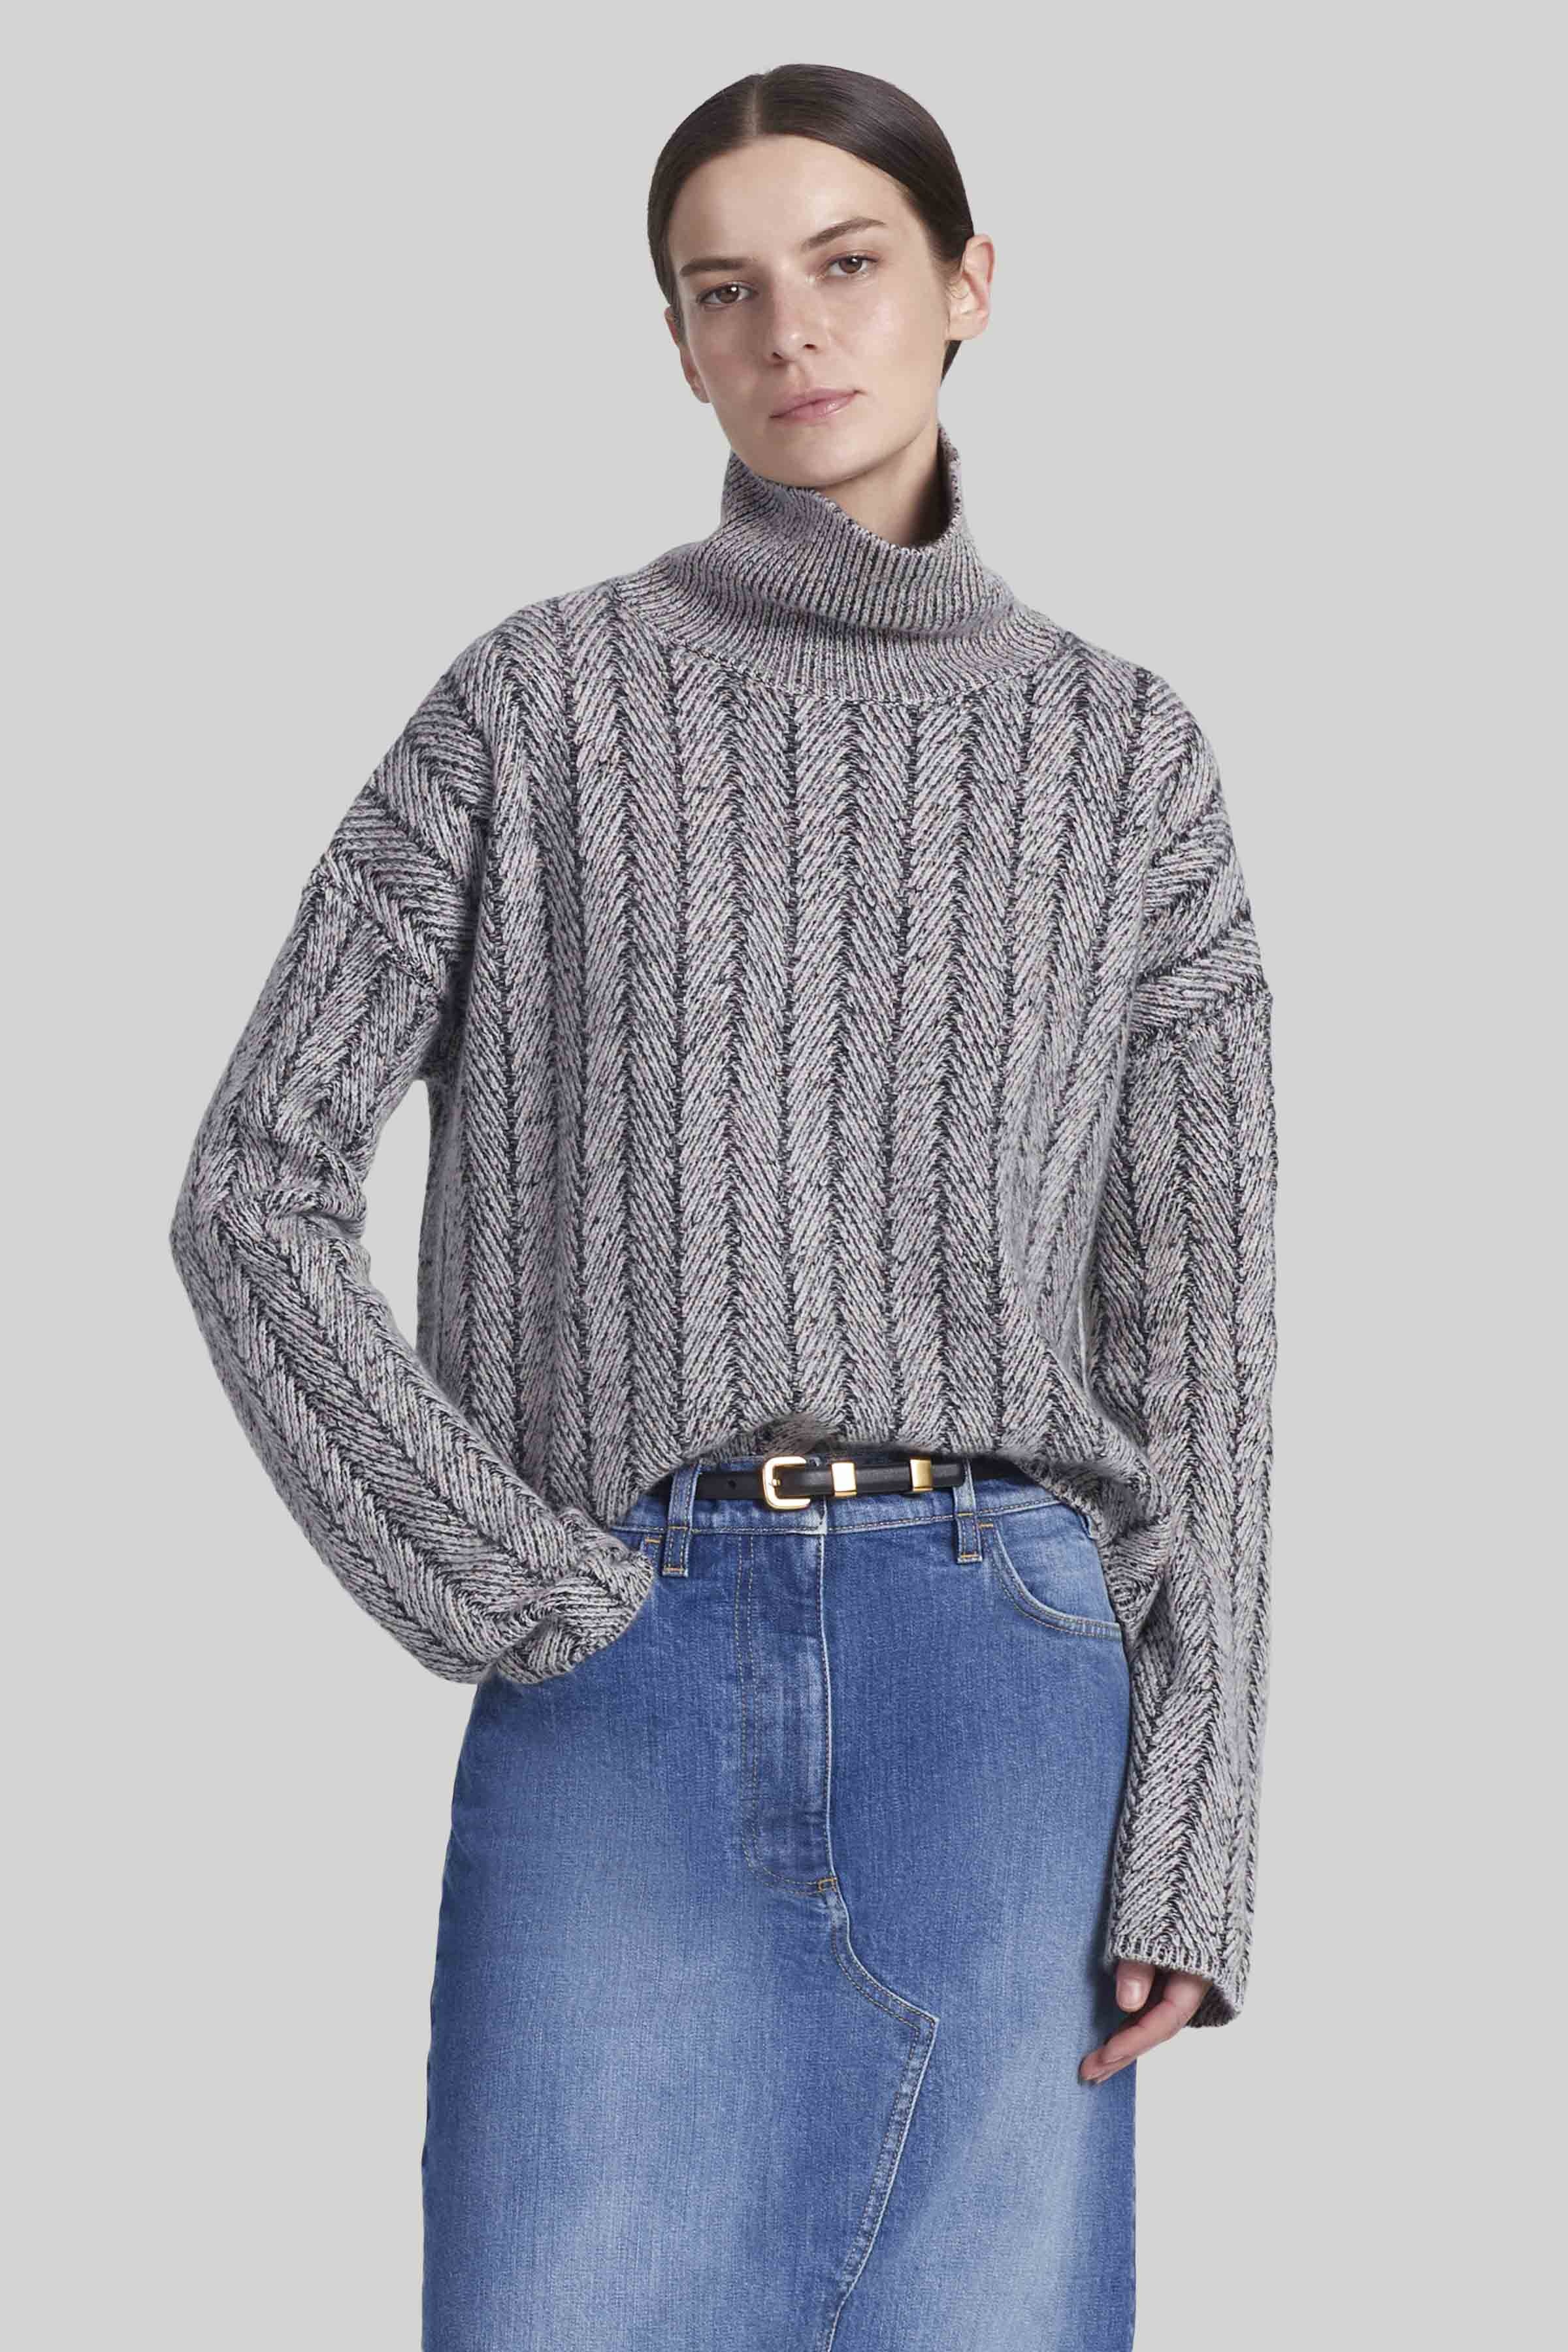 'TERENCE' SWEATER - 2